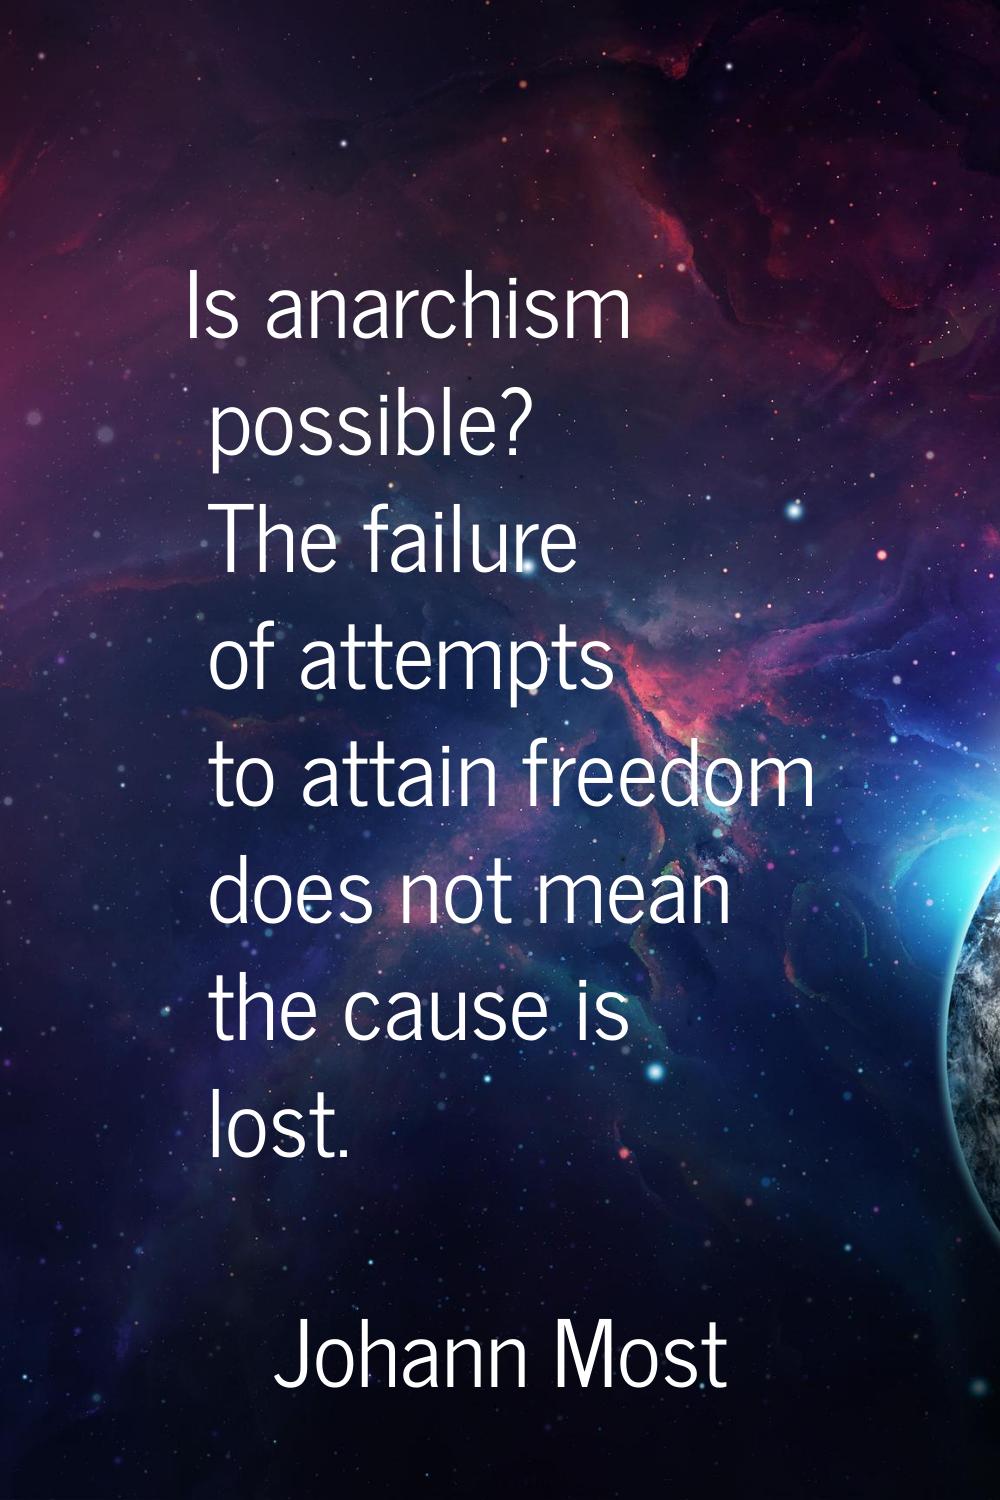 Is anarchism possible? The failure of attempts to attain freedom does not mean the cause is lost.